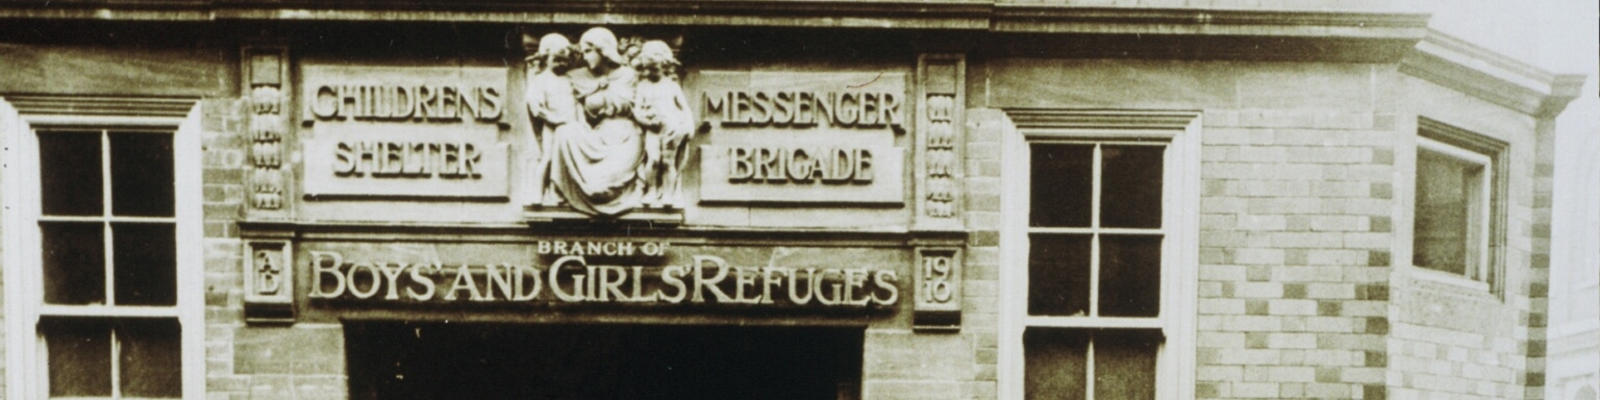 Old black and white photograph of building. The sign on it reads "Children's Shealter and Messenger Brigade. Branch of Boys and Girls Refuges"